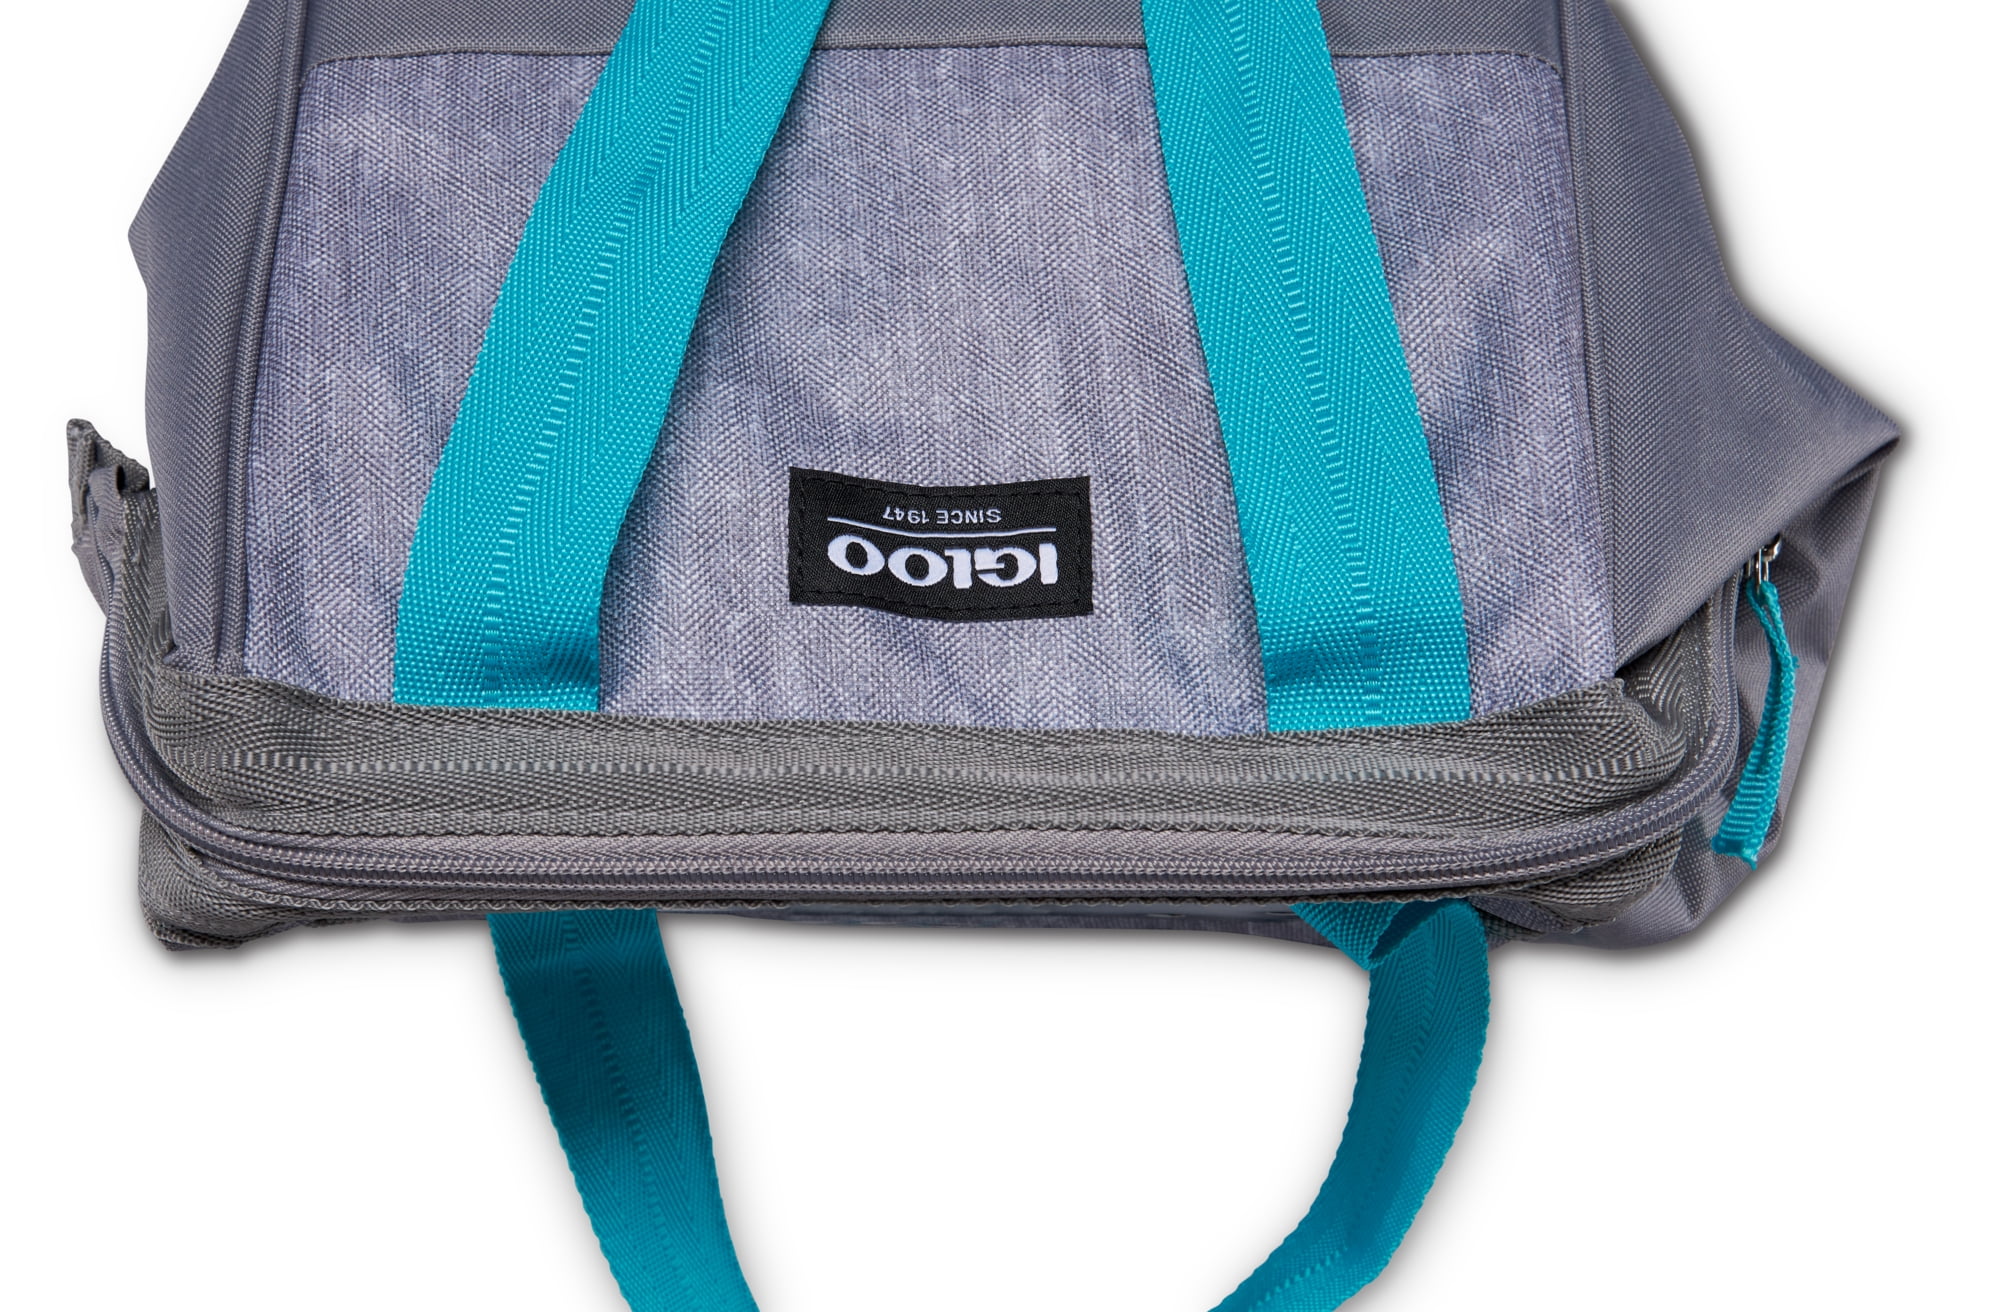 Igloo® Leftover Lunch Bag with Logo 